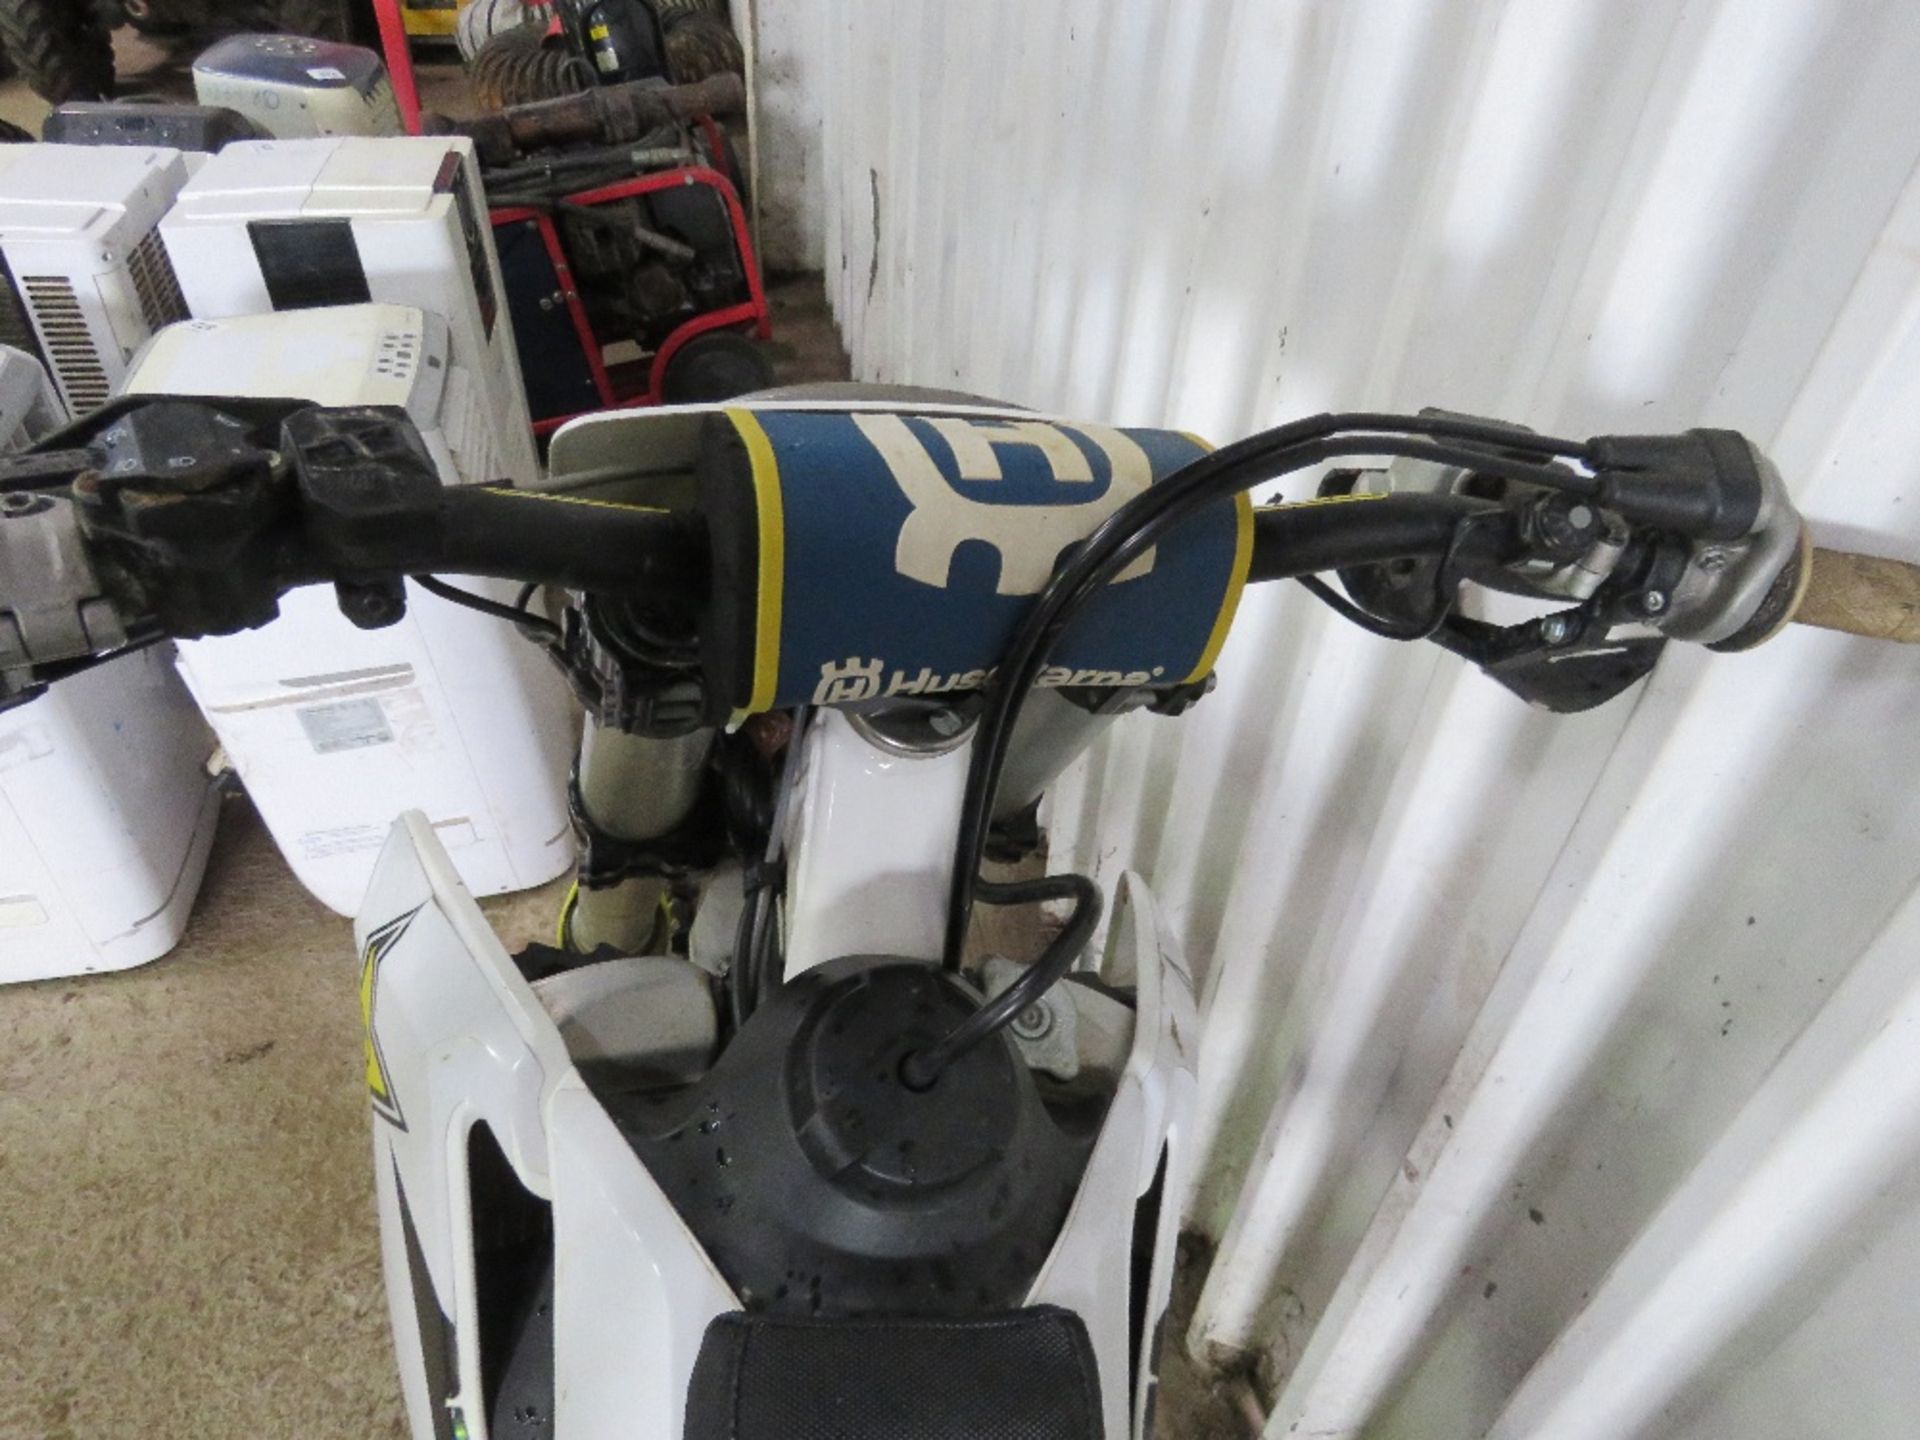 HUSQVARNA 450CC TRIALS BIKE, REG:LK18 EXO WITH V5 (FIRST ROAD REGISTERED 2021). WHEN TESTED WAS SEE - Image 13 of 15